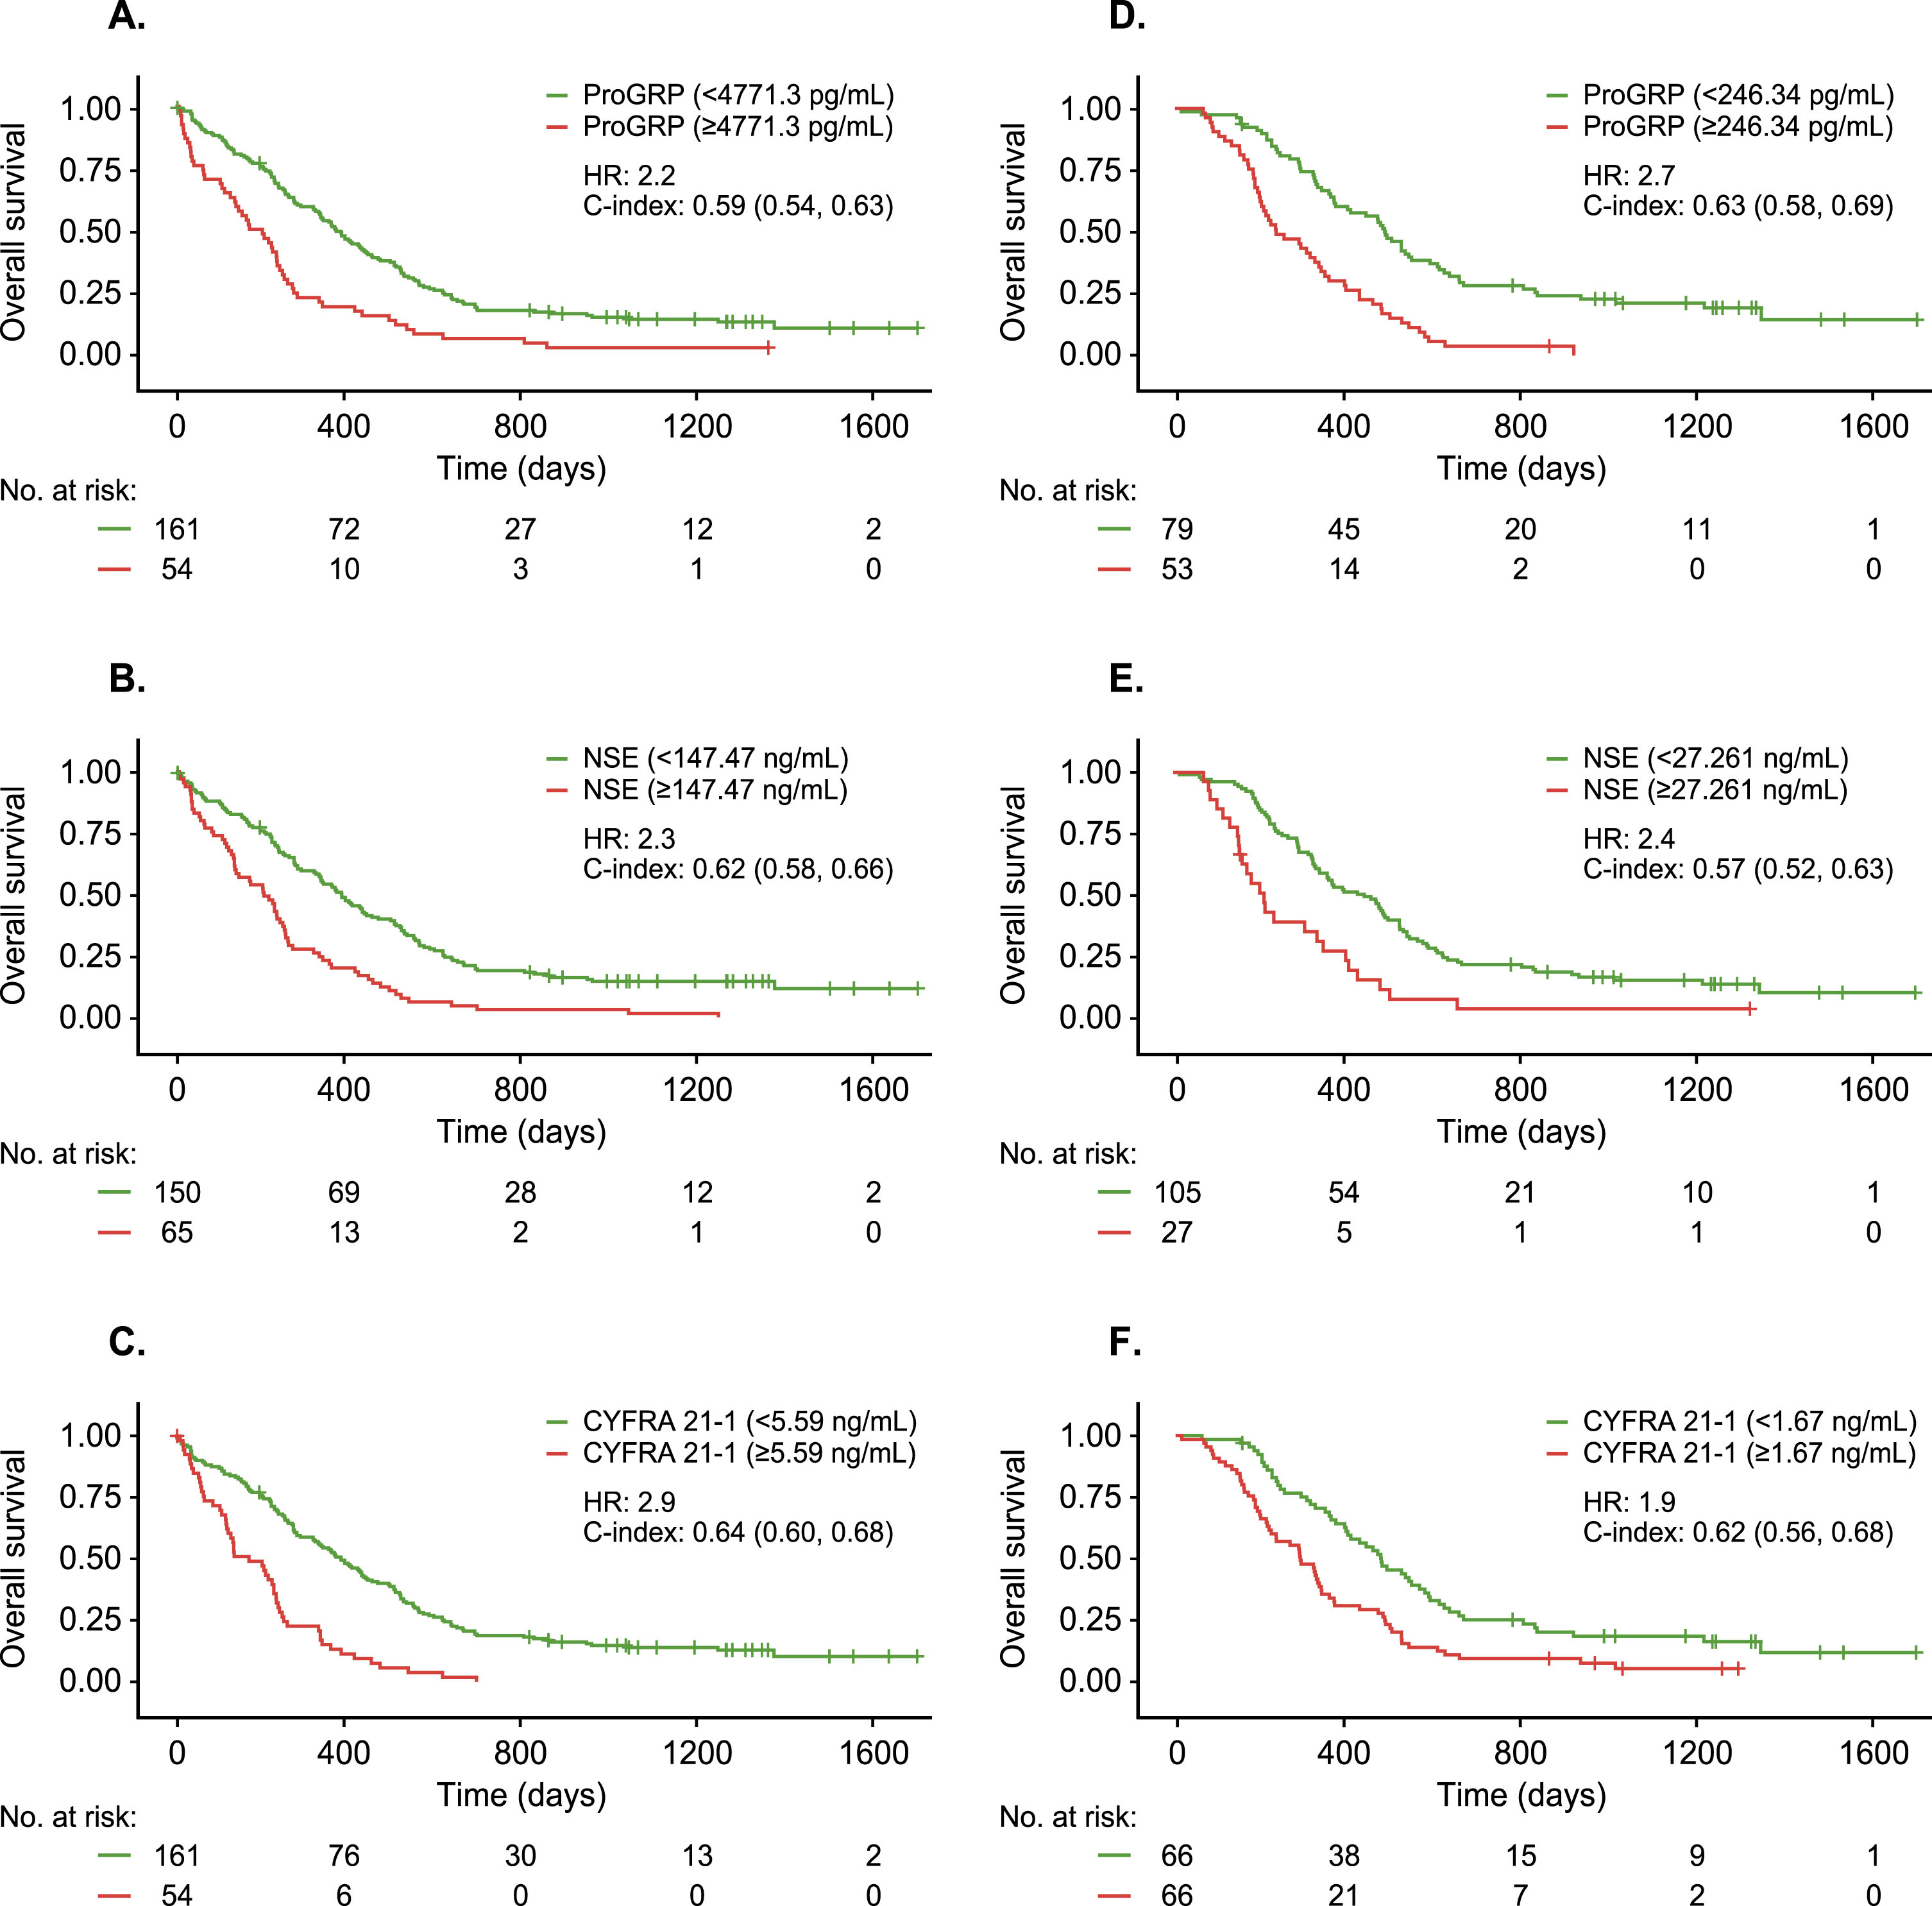 Correlation between tumor biomarker level and overall survival. Kaplan-Meier survival curves for patients in high-risk (red) and low-risk (green) subgroups defined by ProGRP, NSE and CYFRA 21-1 levels measured either pre-treatment (A-C) or after two treatment cycles (D-F) using optimized cutoffs.